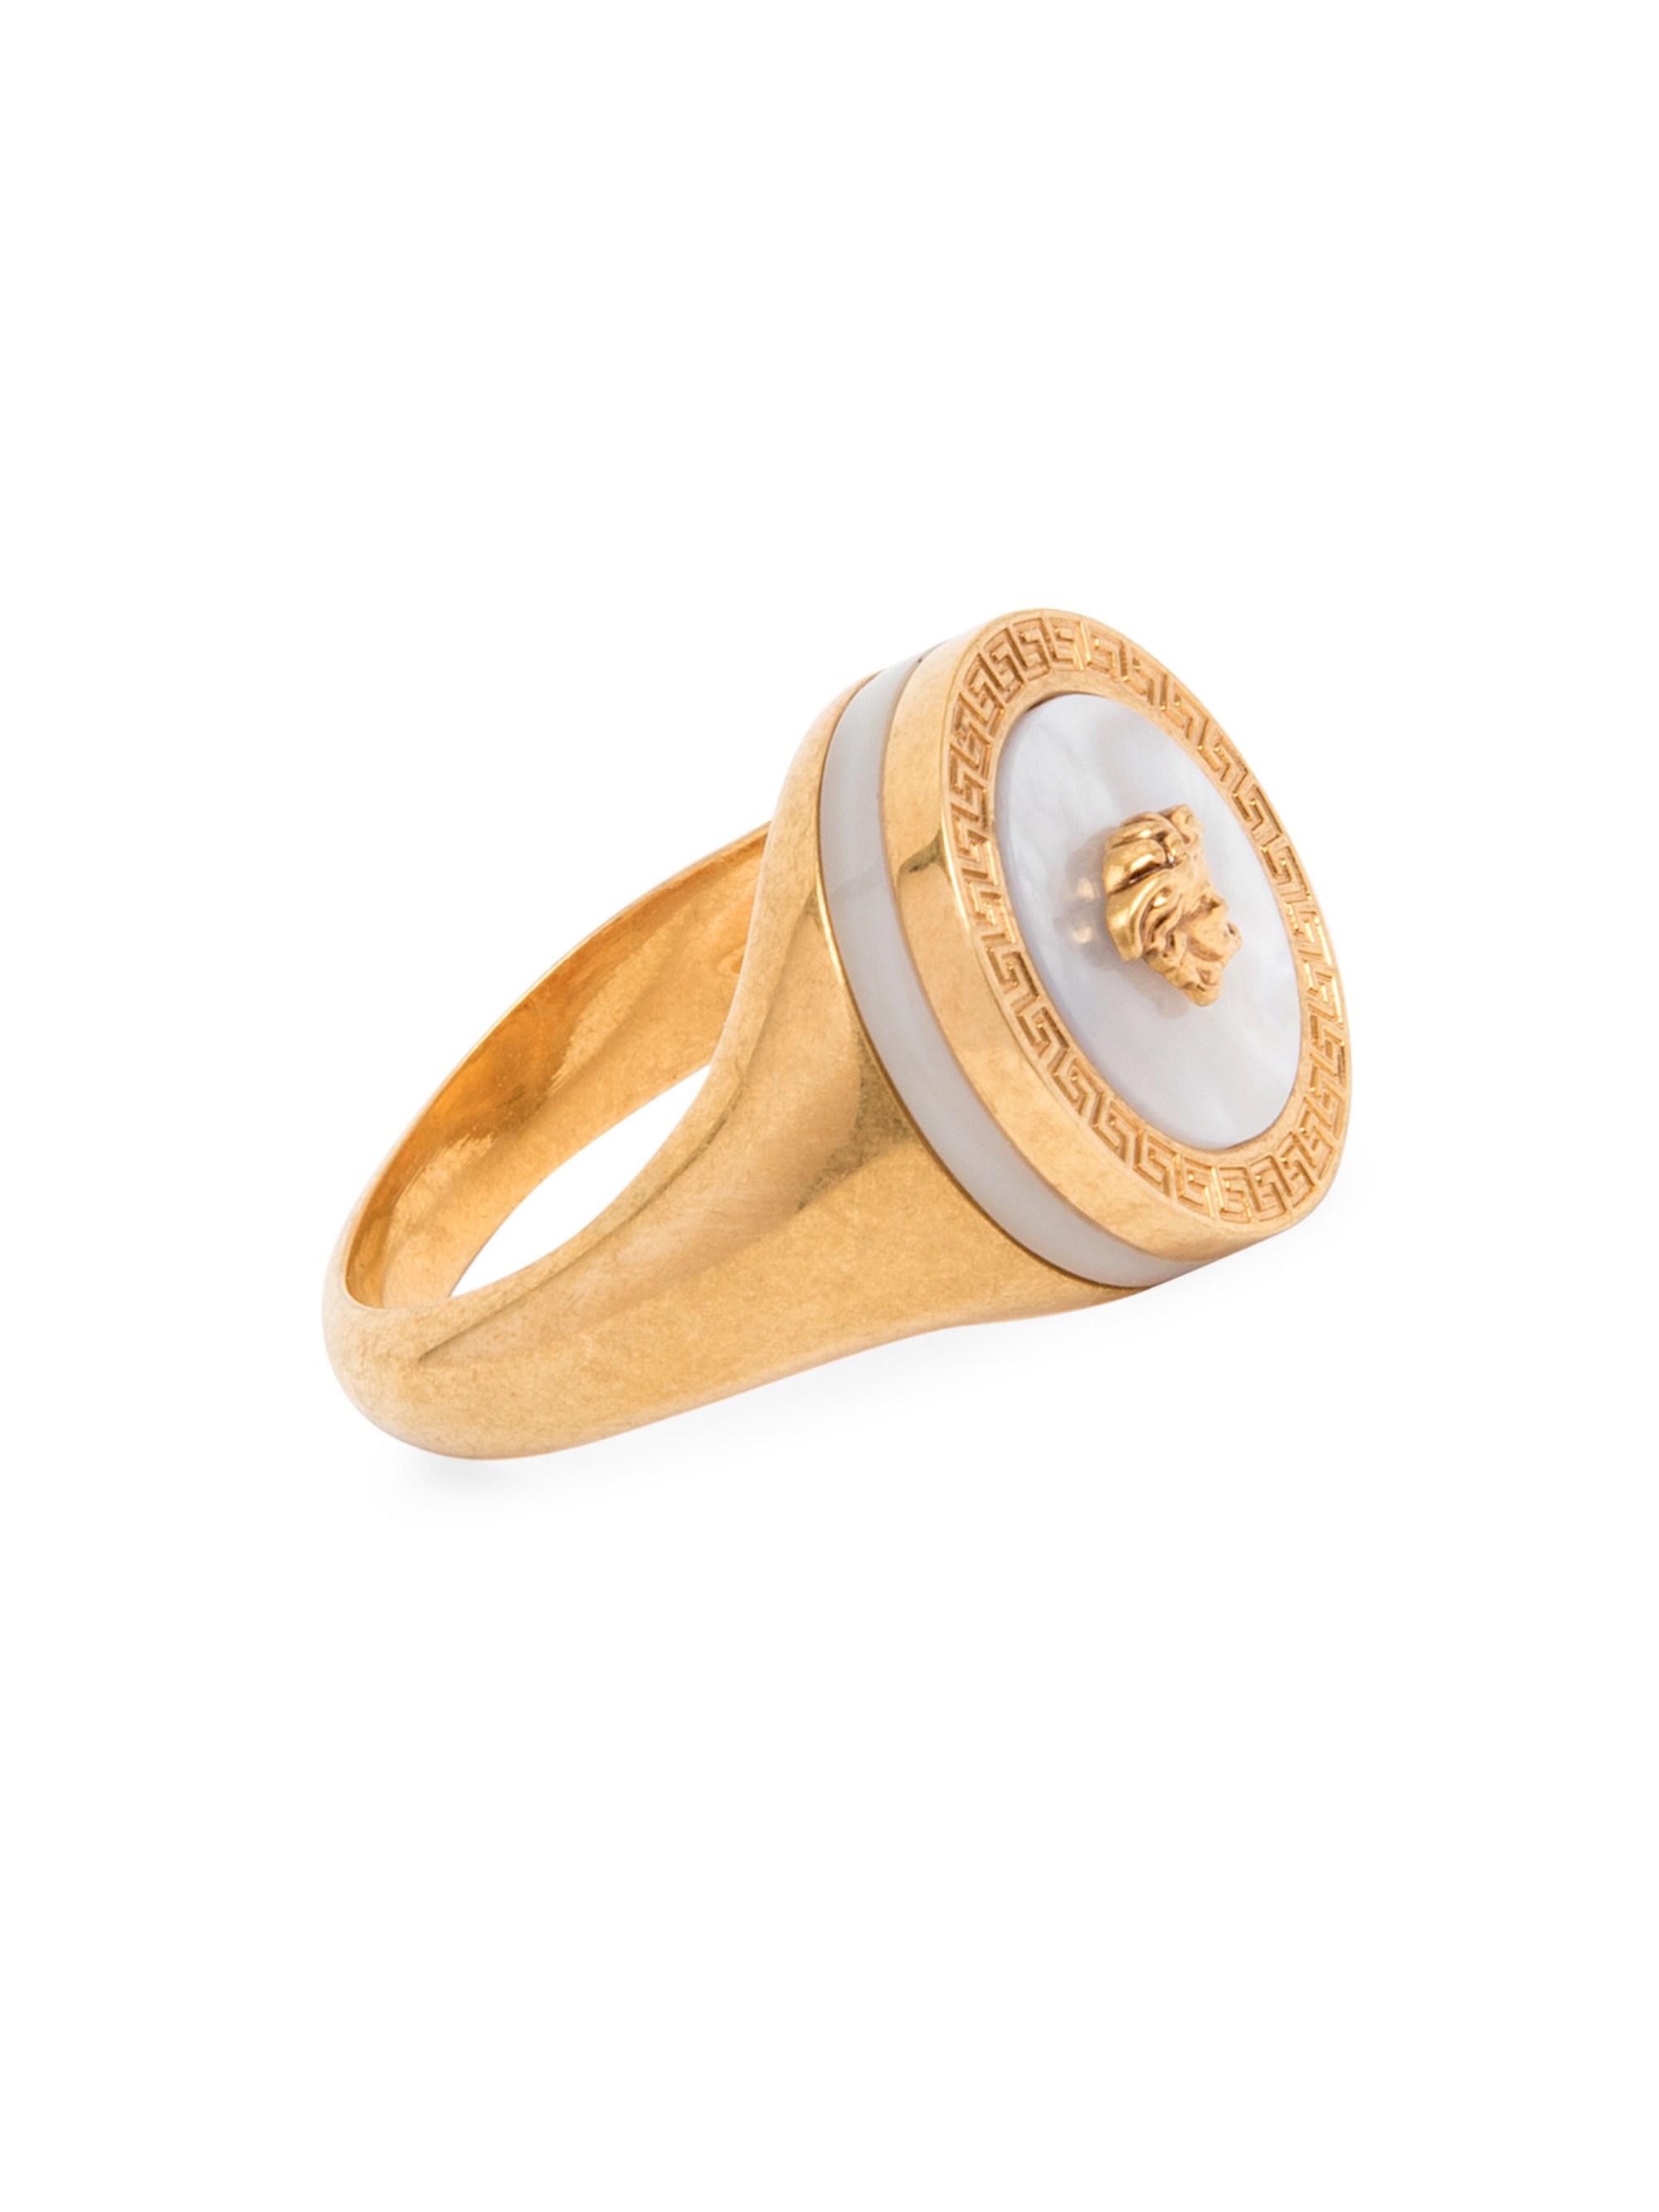 Versace Mother Of Pearl Medusa Ring in 